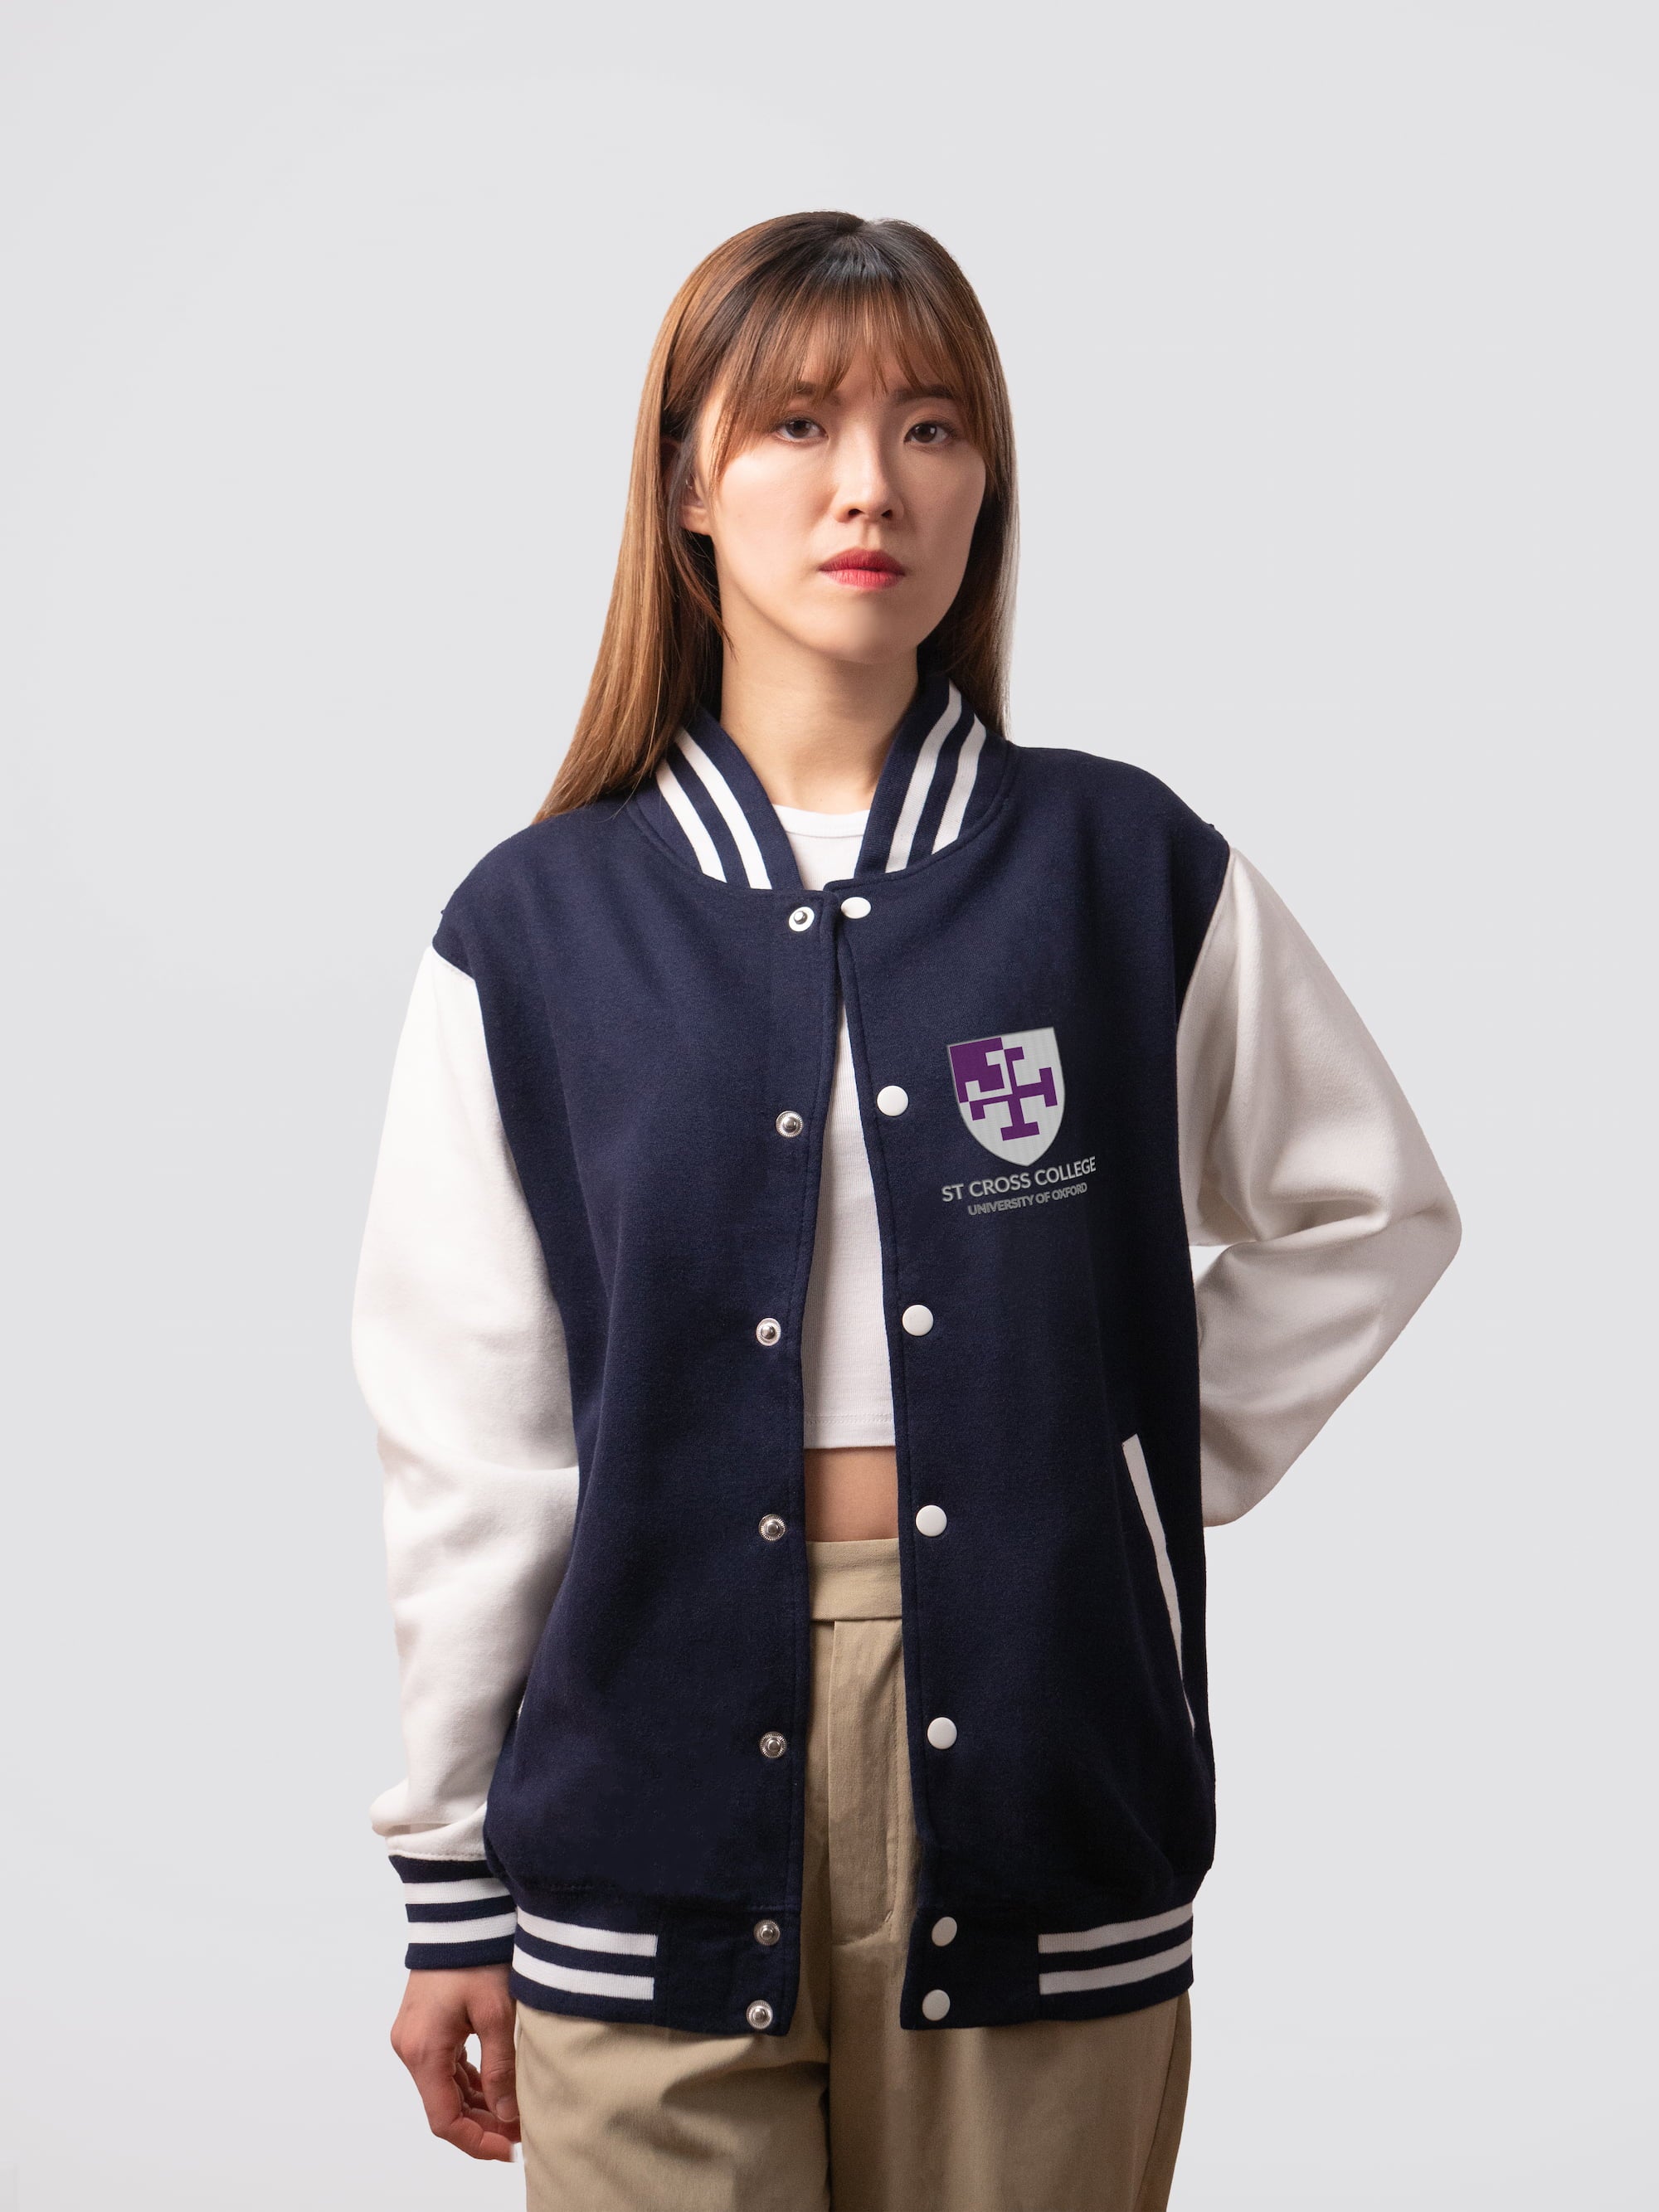 Retro style varsity jacket, with embroidered St Cross crest